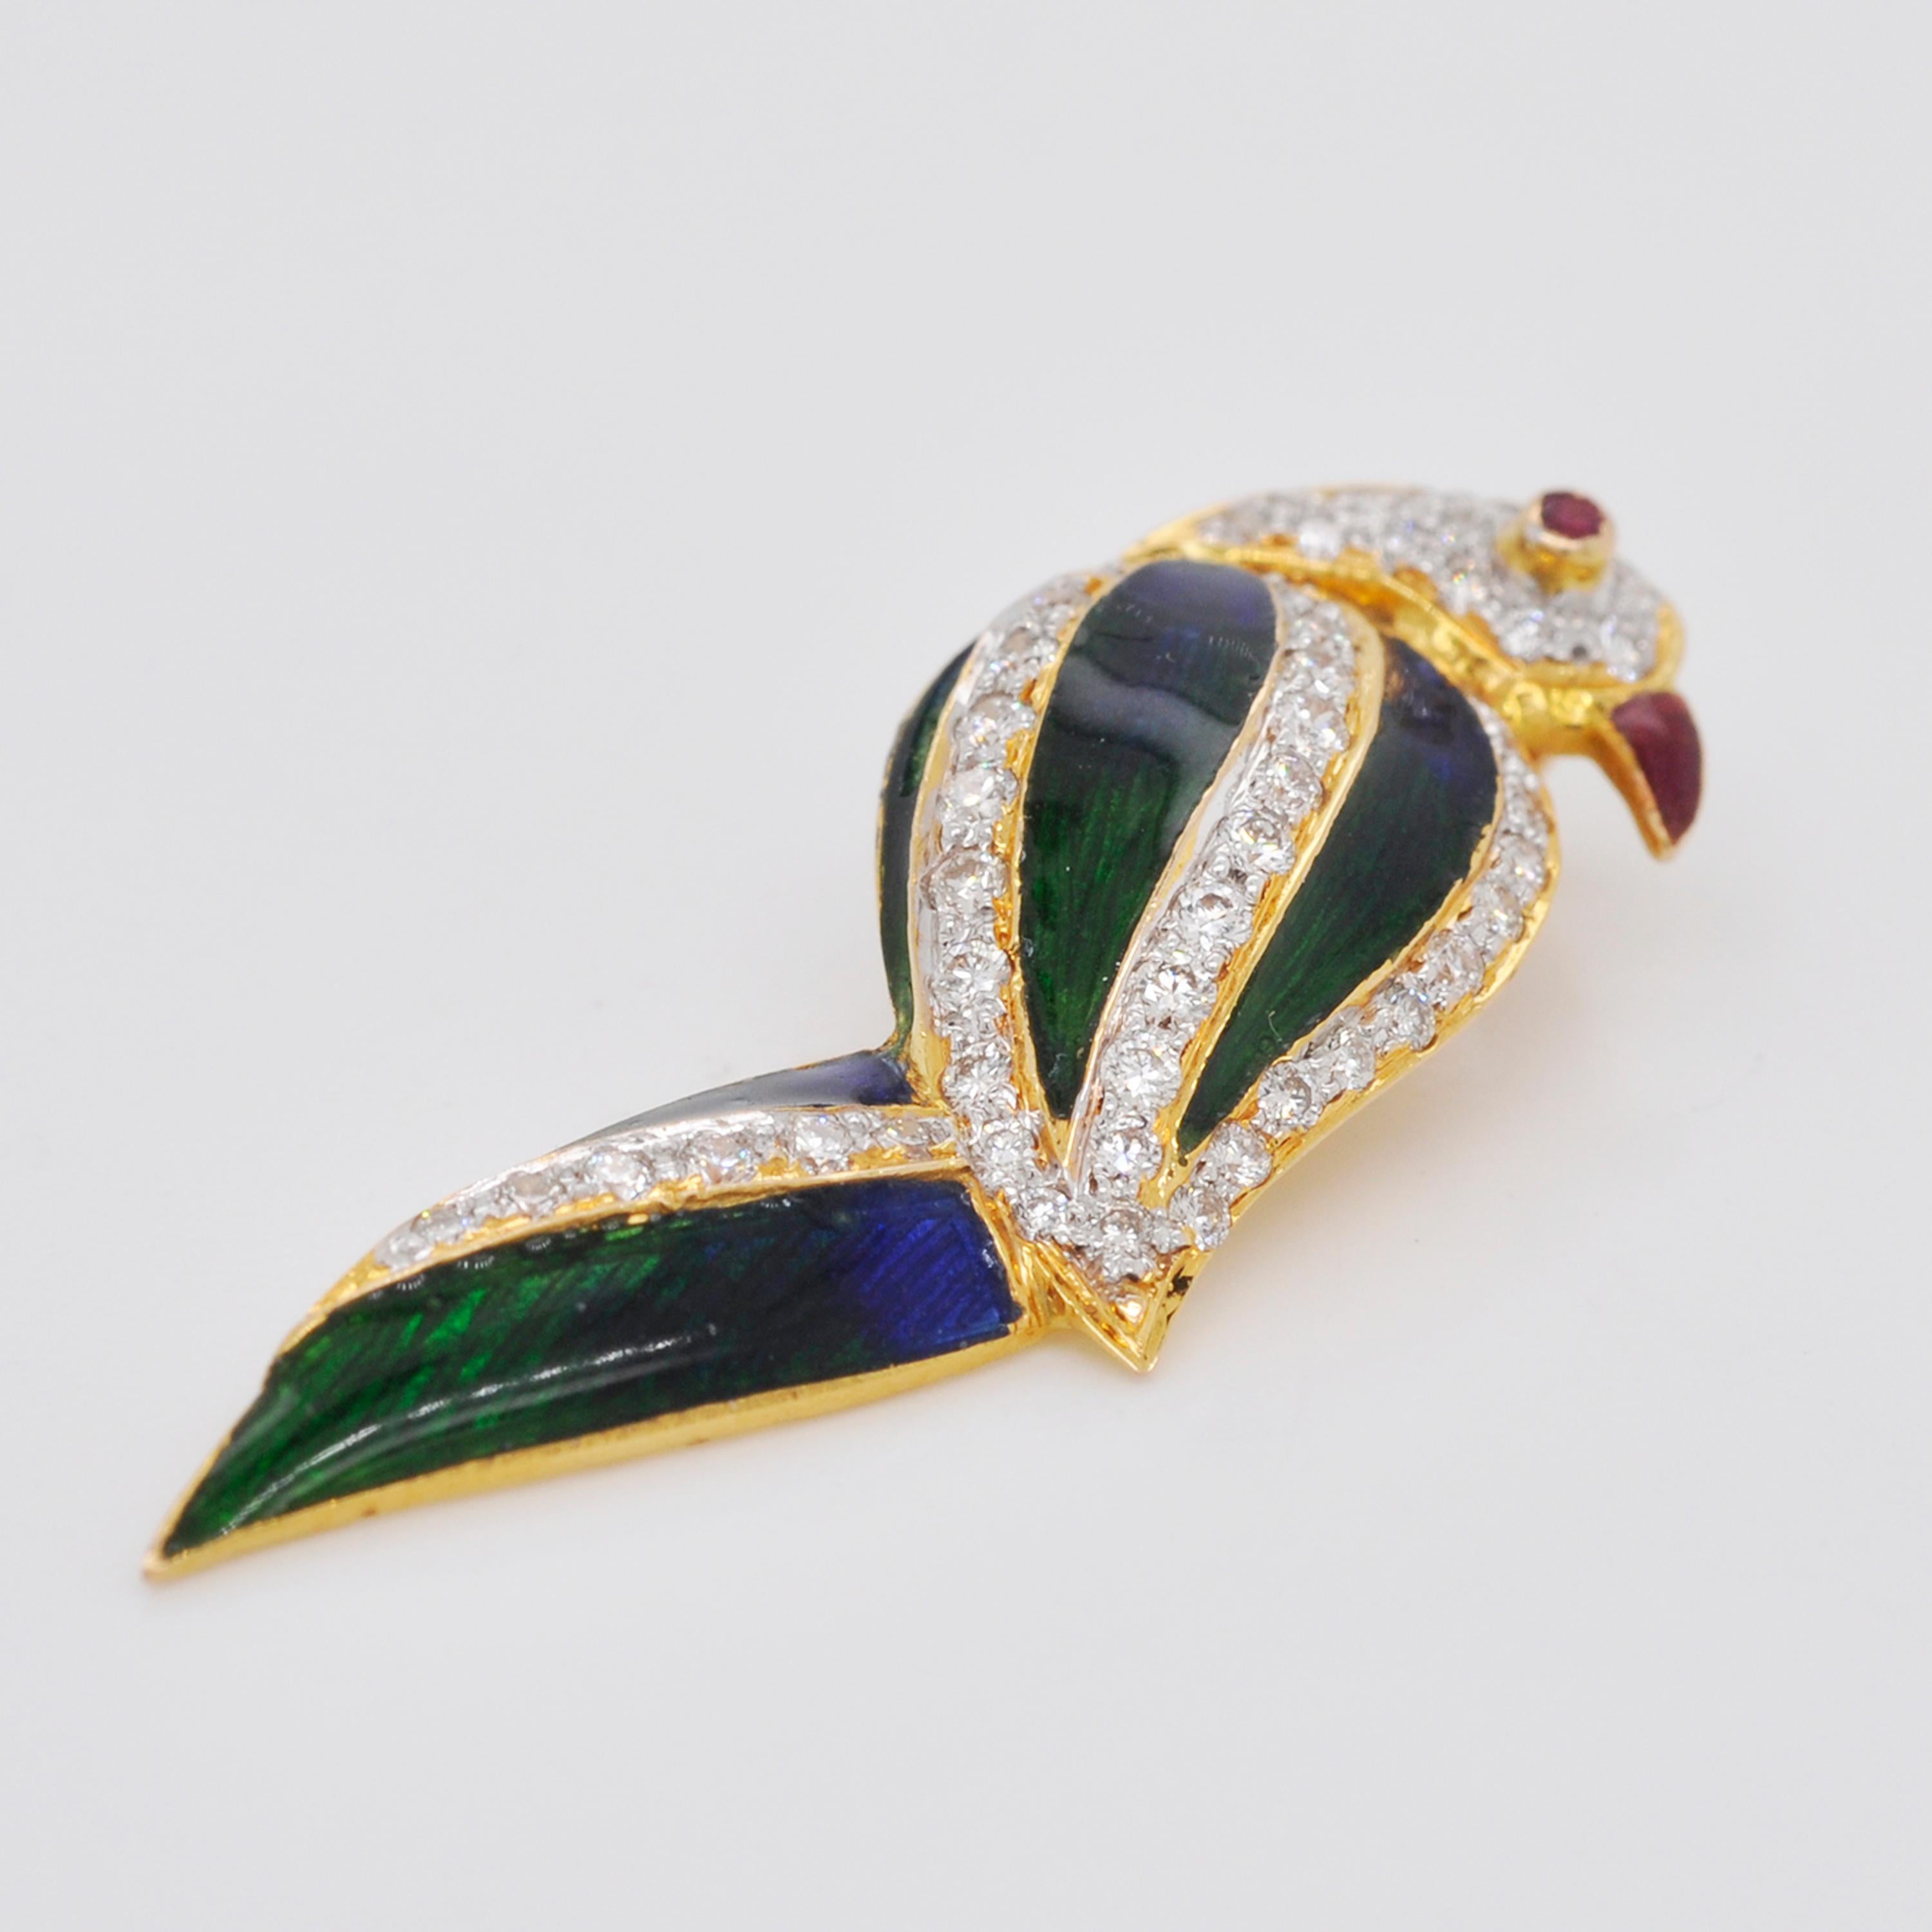 18 Karat Gold French Enamel Diamond Parrot Pendant Necklace In New Condition For Sale In Jaipur, Rajasthan